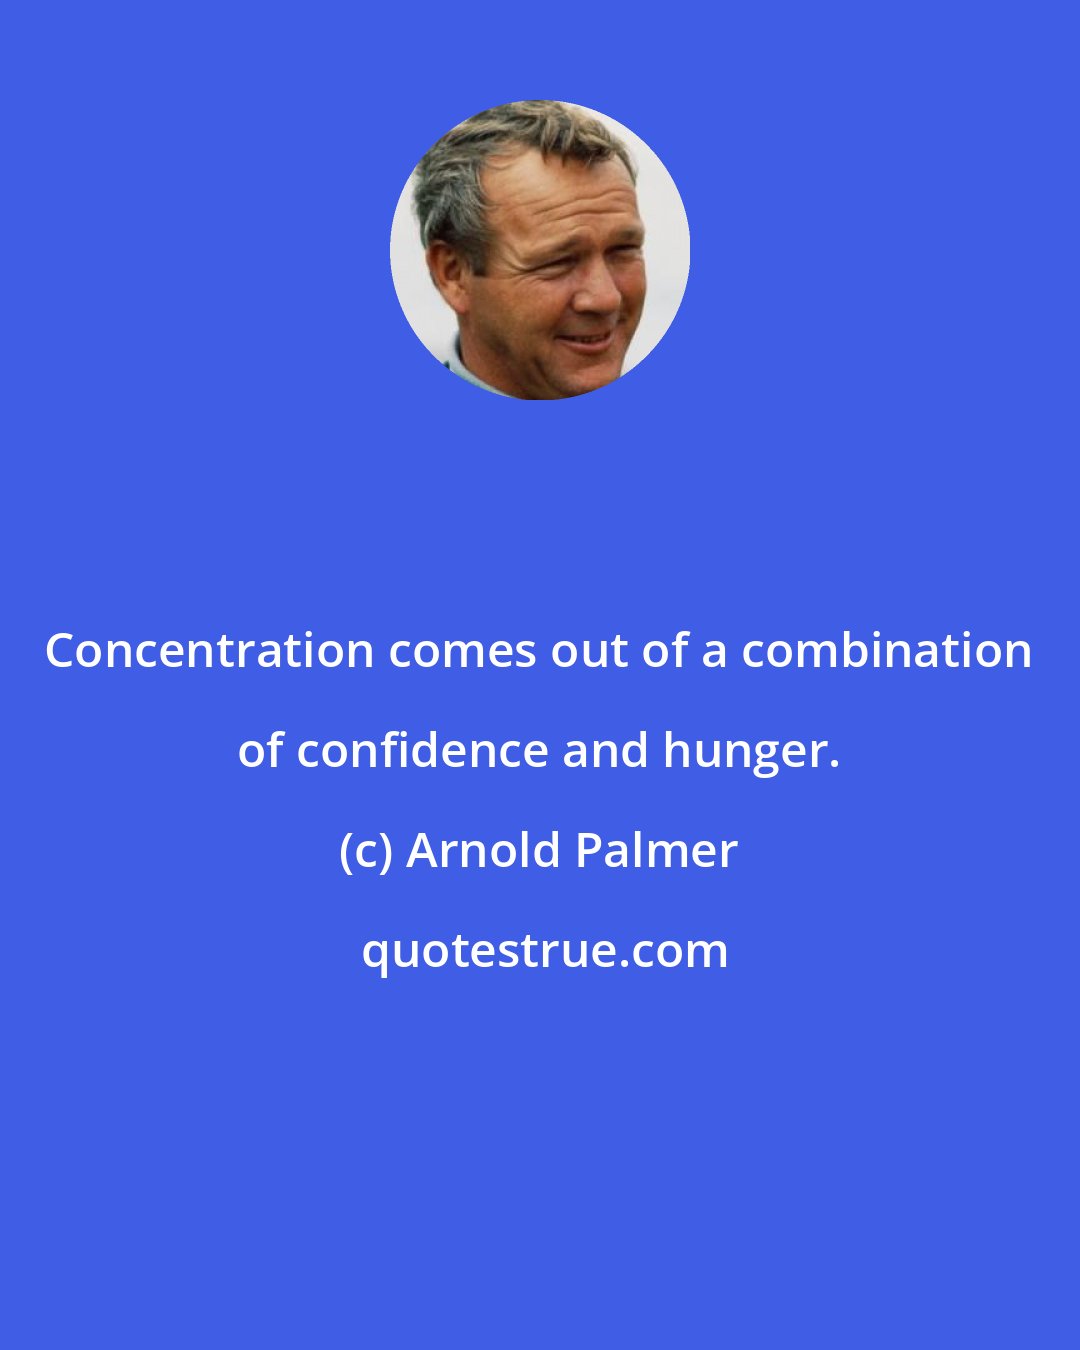 Arnold Palmer: Concentration comes out of a combination of confidence and hunger.